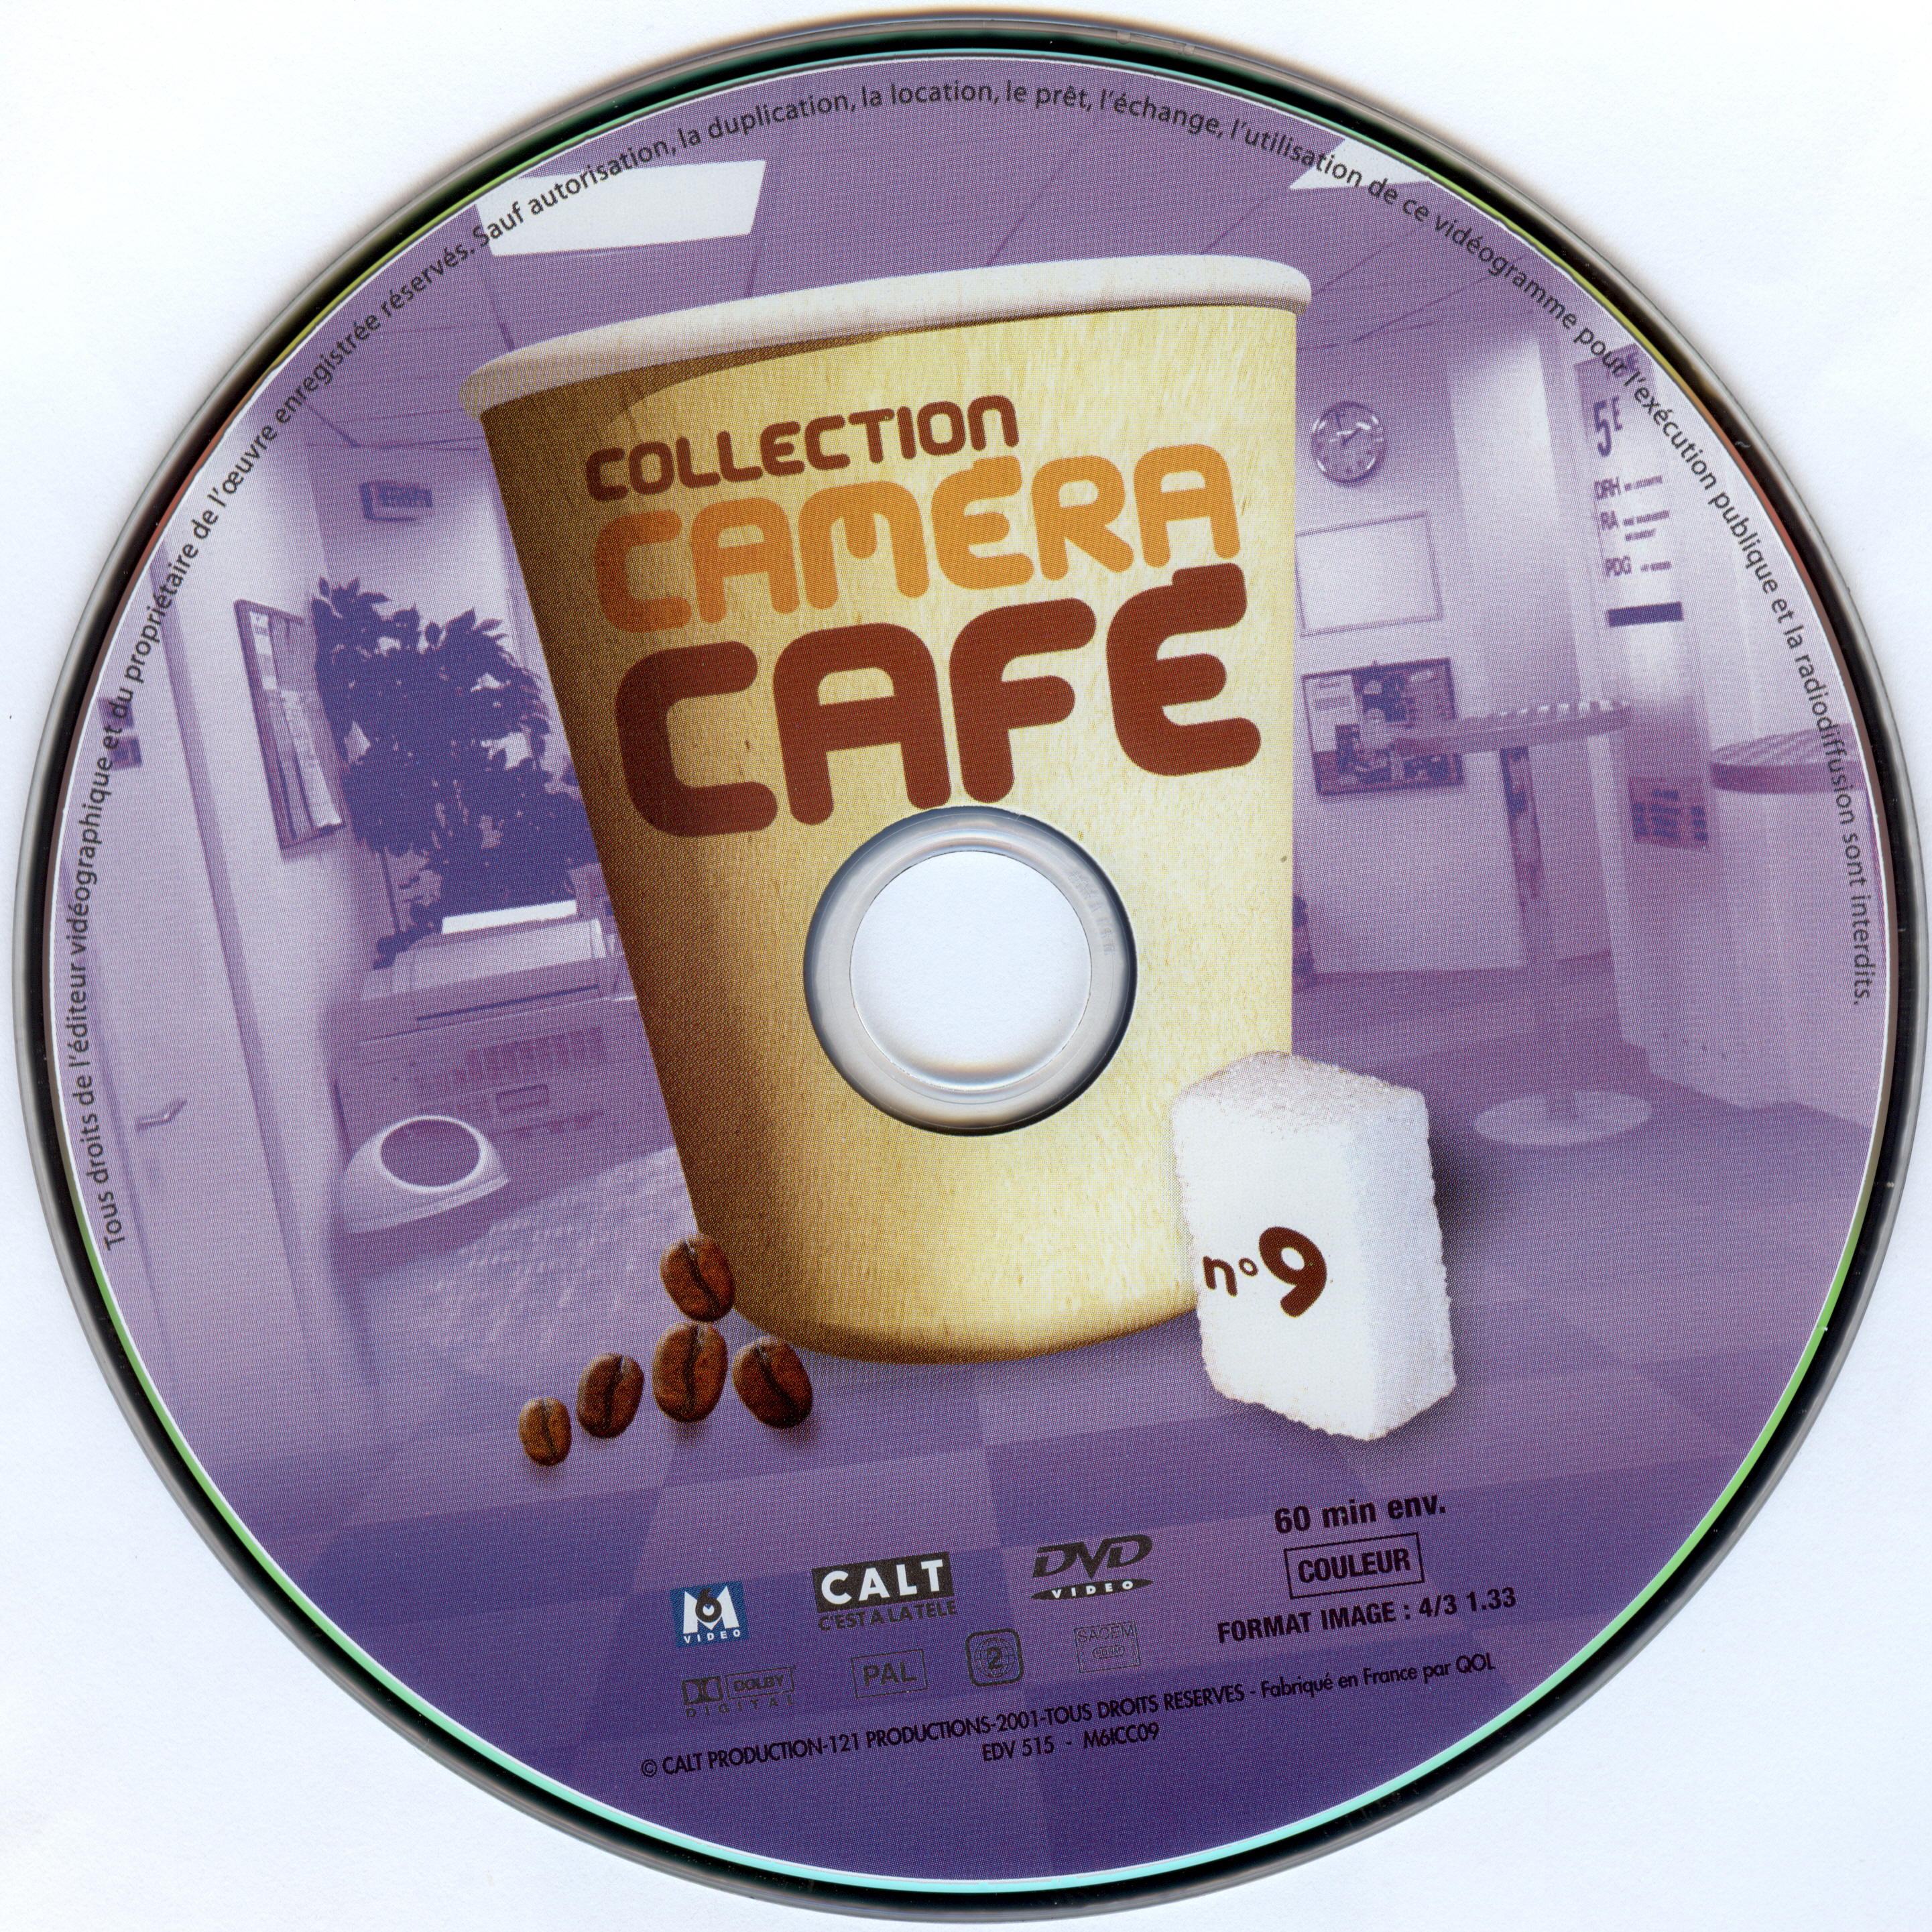 Collection Camera Cafe vol 09